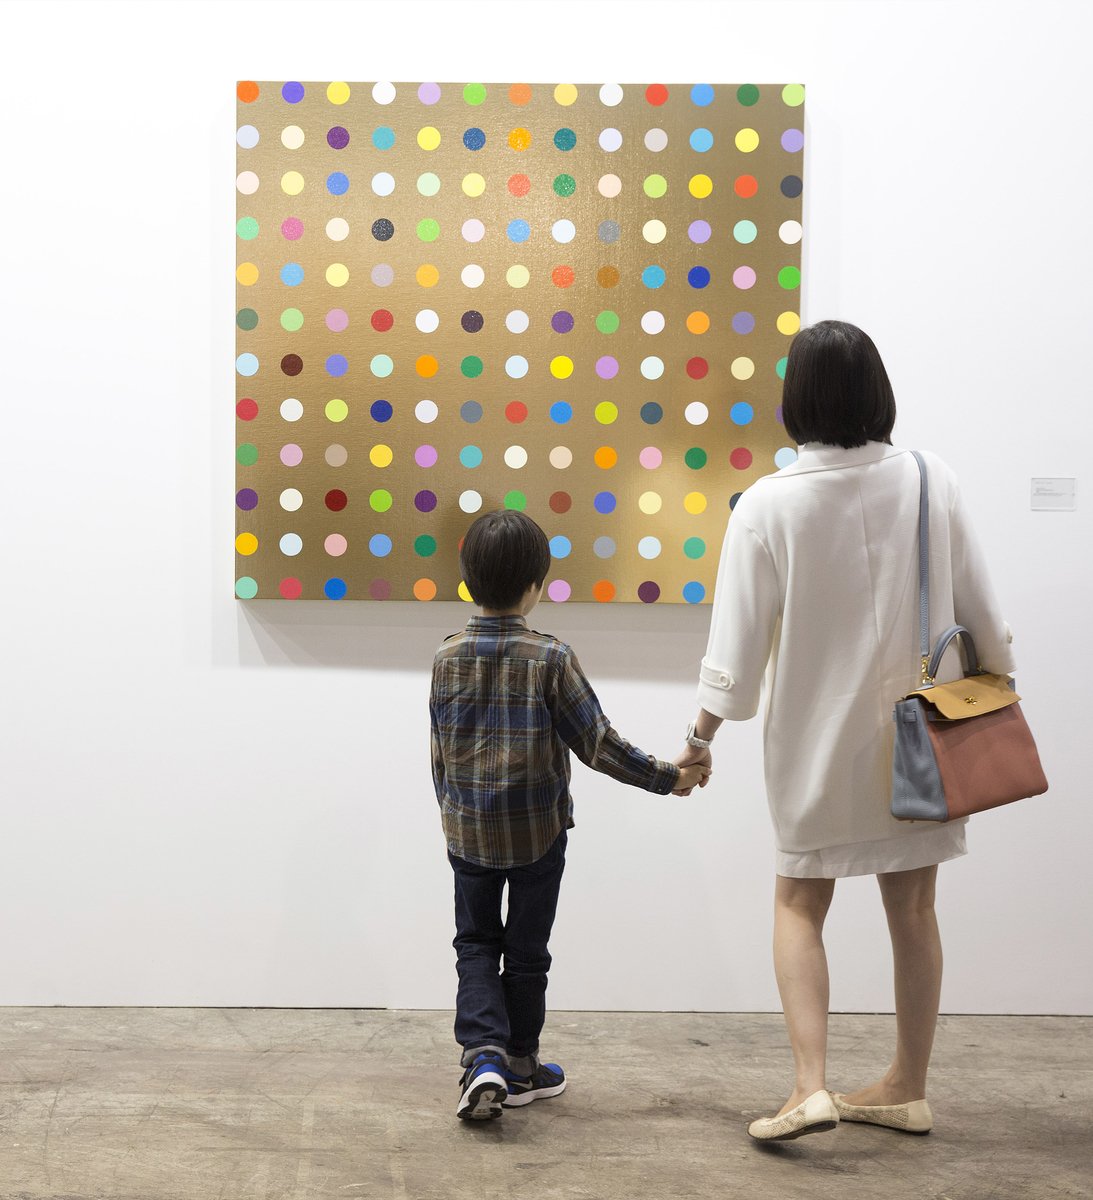 White Cube's booth at the fair this year, with a Damien Hirst spot painting